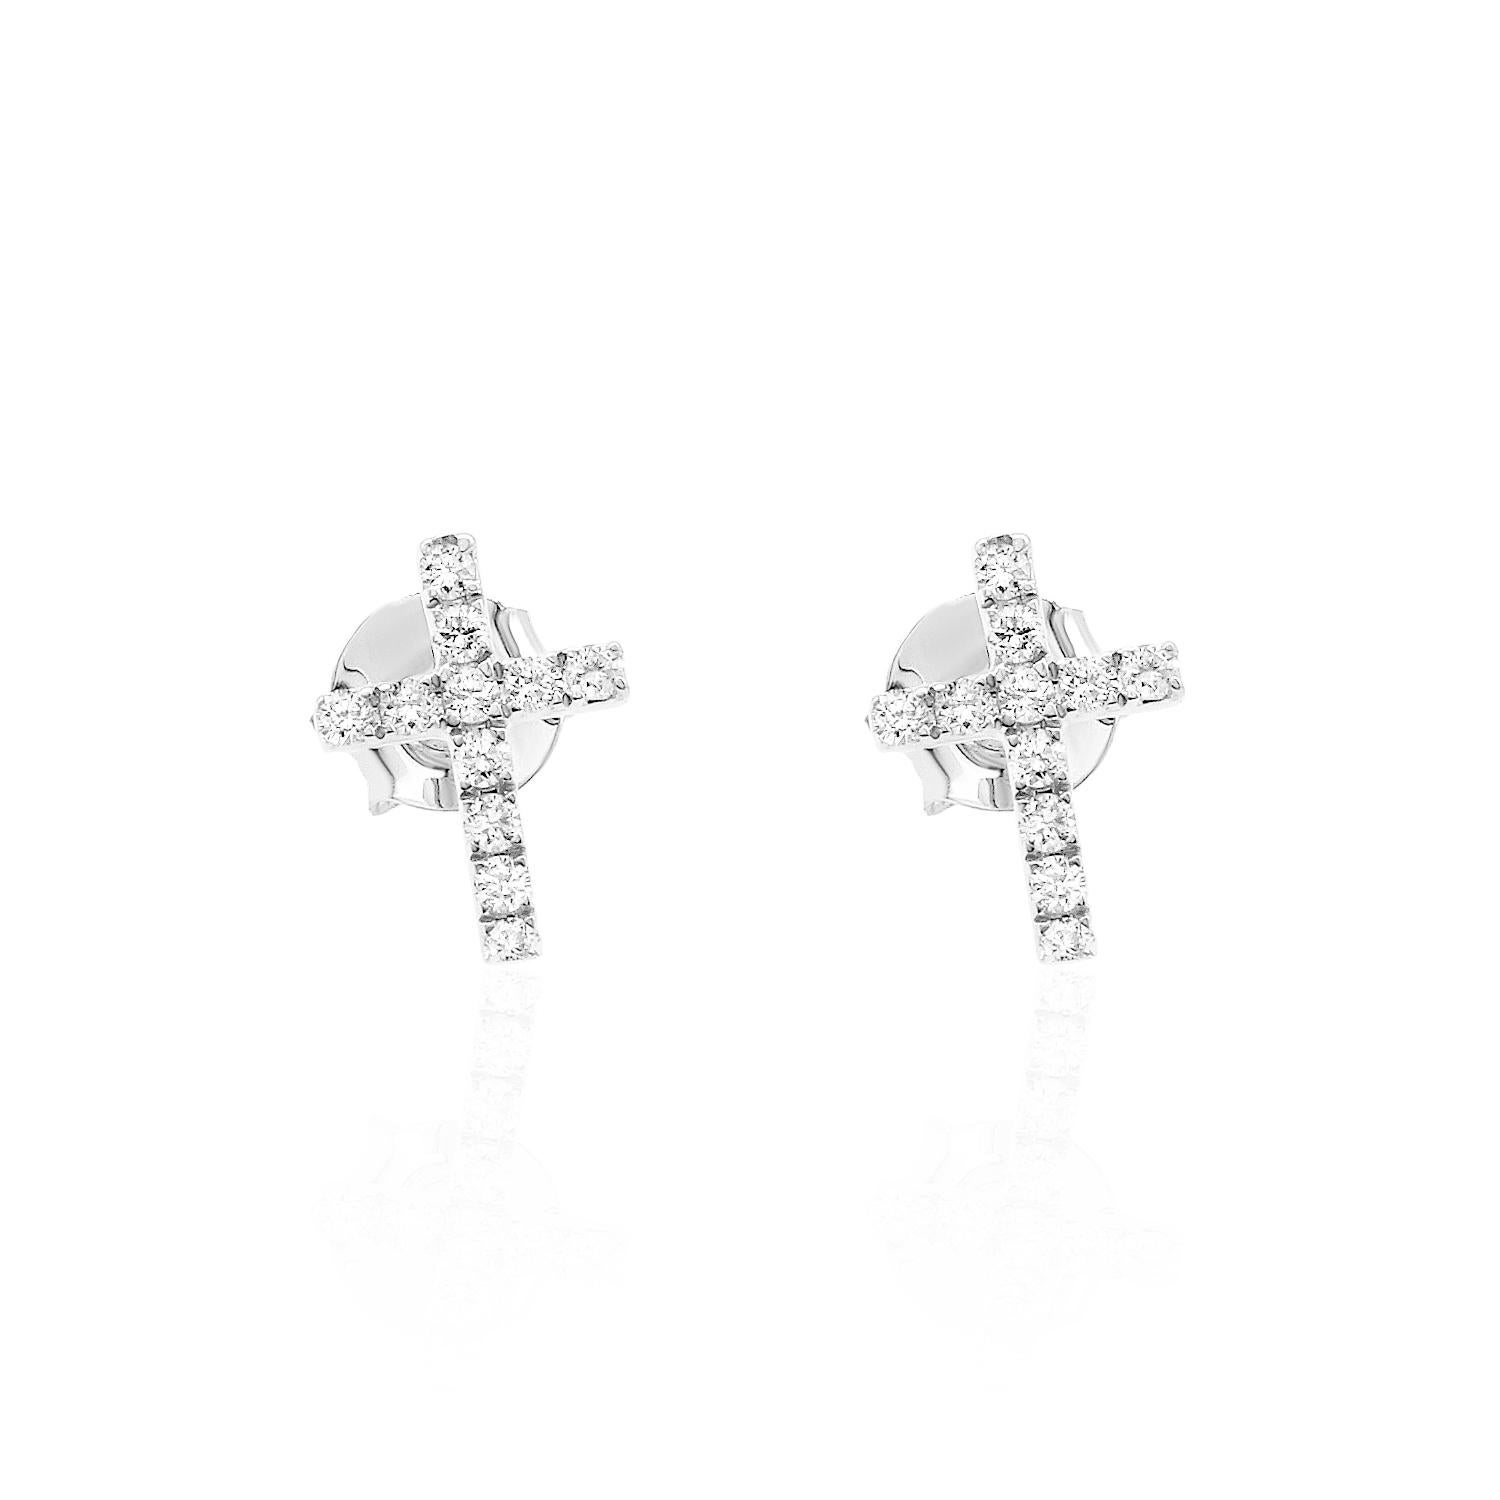 Modern and Spirituality Inspired Signature Cross Diamond Earrings, featuring:
✧ 22 natural earth mined diamonds G-H color VS-SI weighing 0.17 carats 
✧ Measurements: 9.7mm*6.9mm
✧ Available in 14K White, Yellow, and Rose Gold
✧ Push back friction